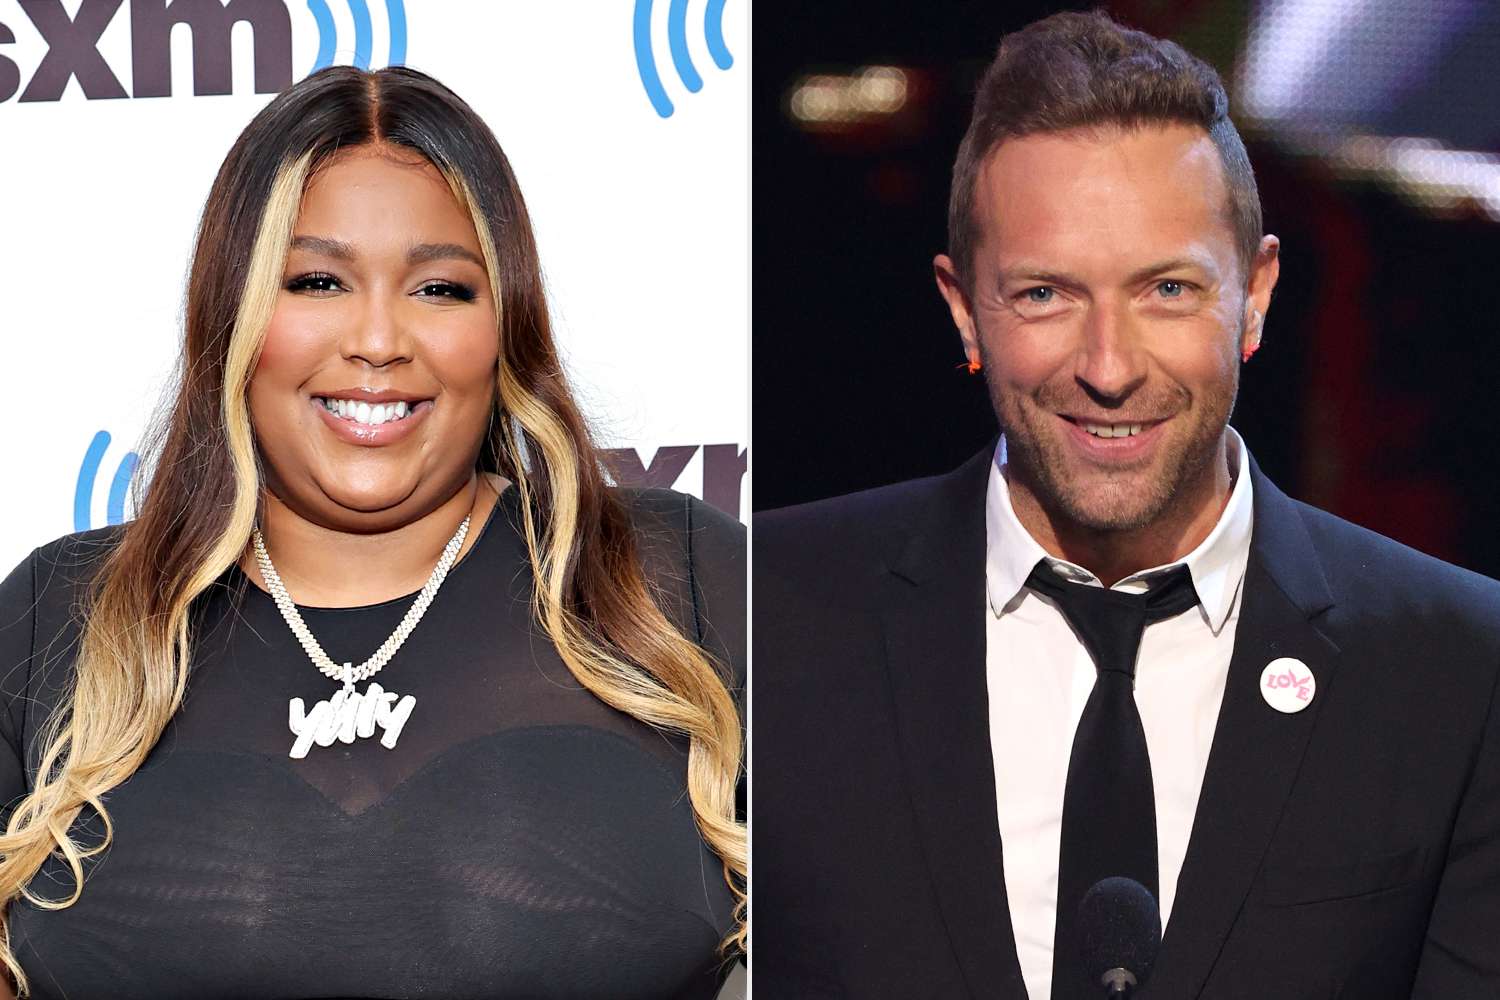 Lizzo visits the SiriusXM Studios; Chris Martin speaks onstage at the 2021 iHeartRadio Music Awards